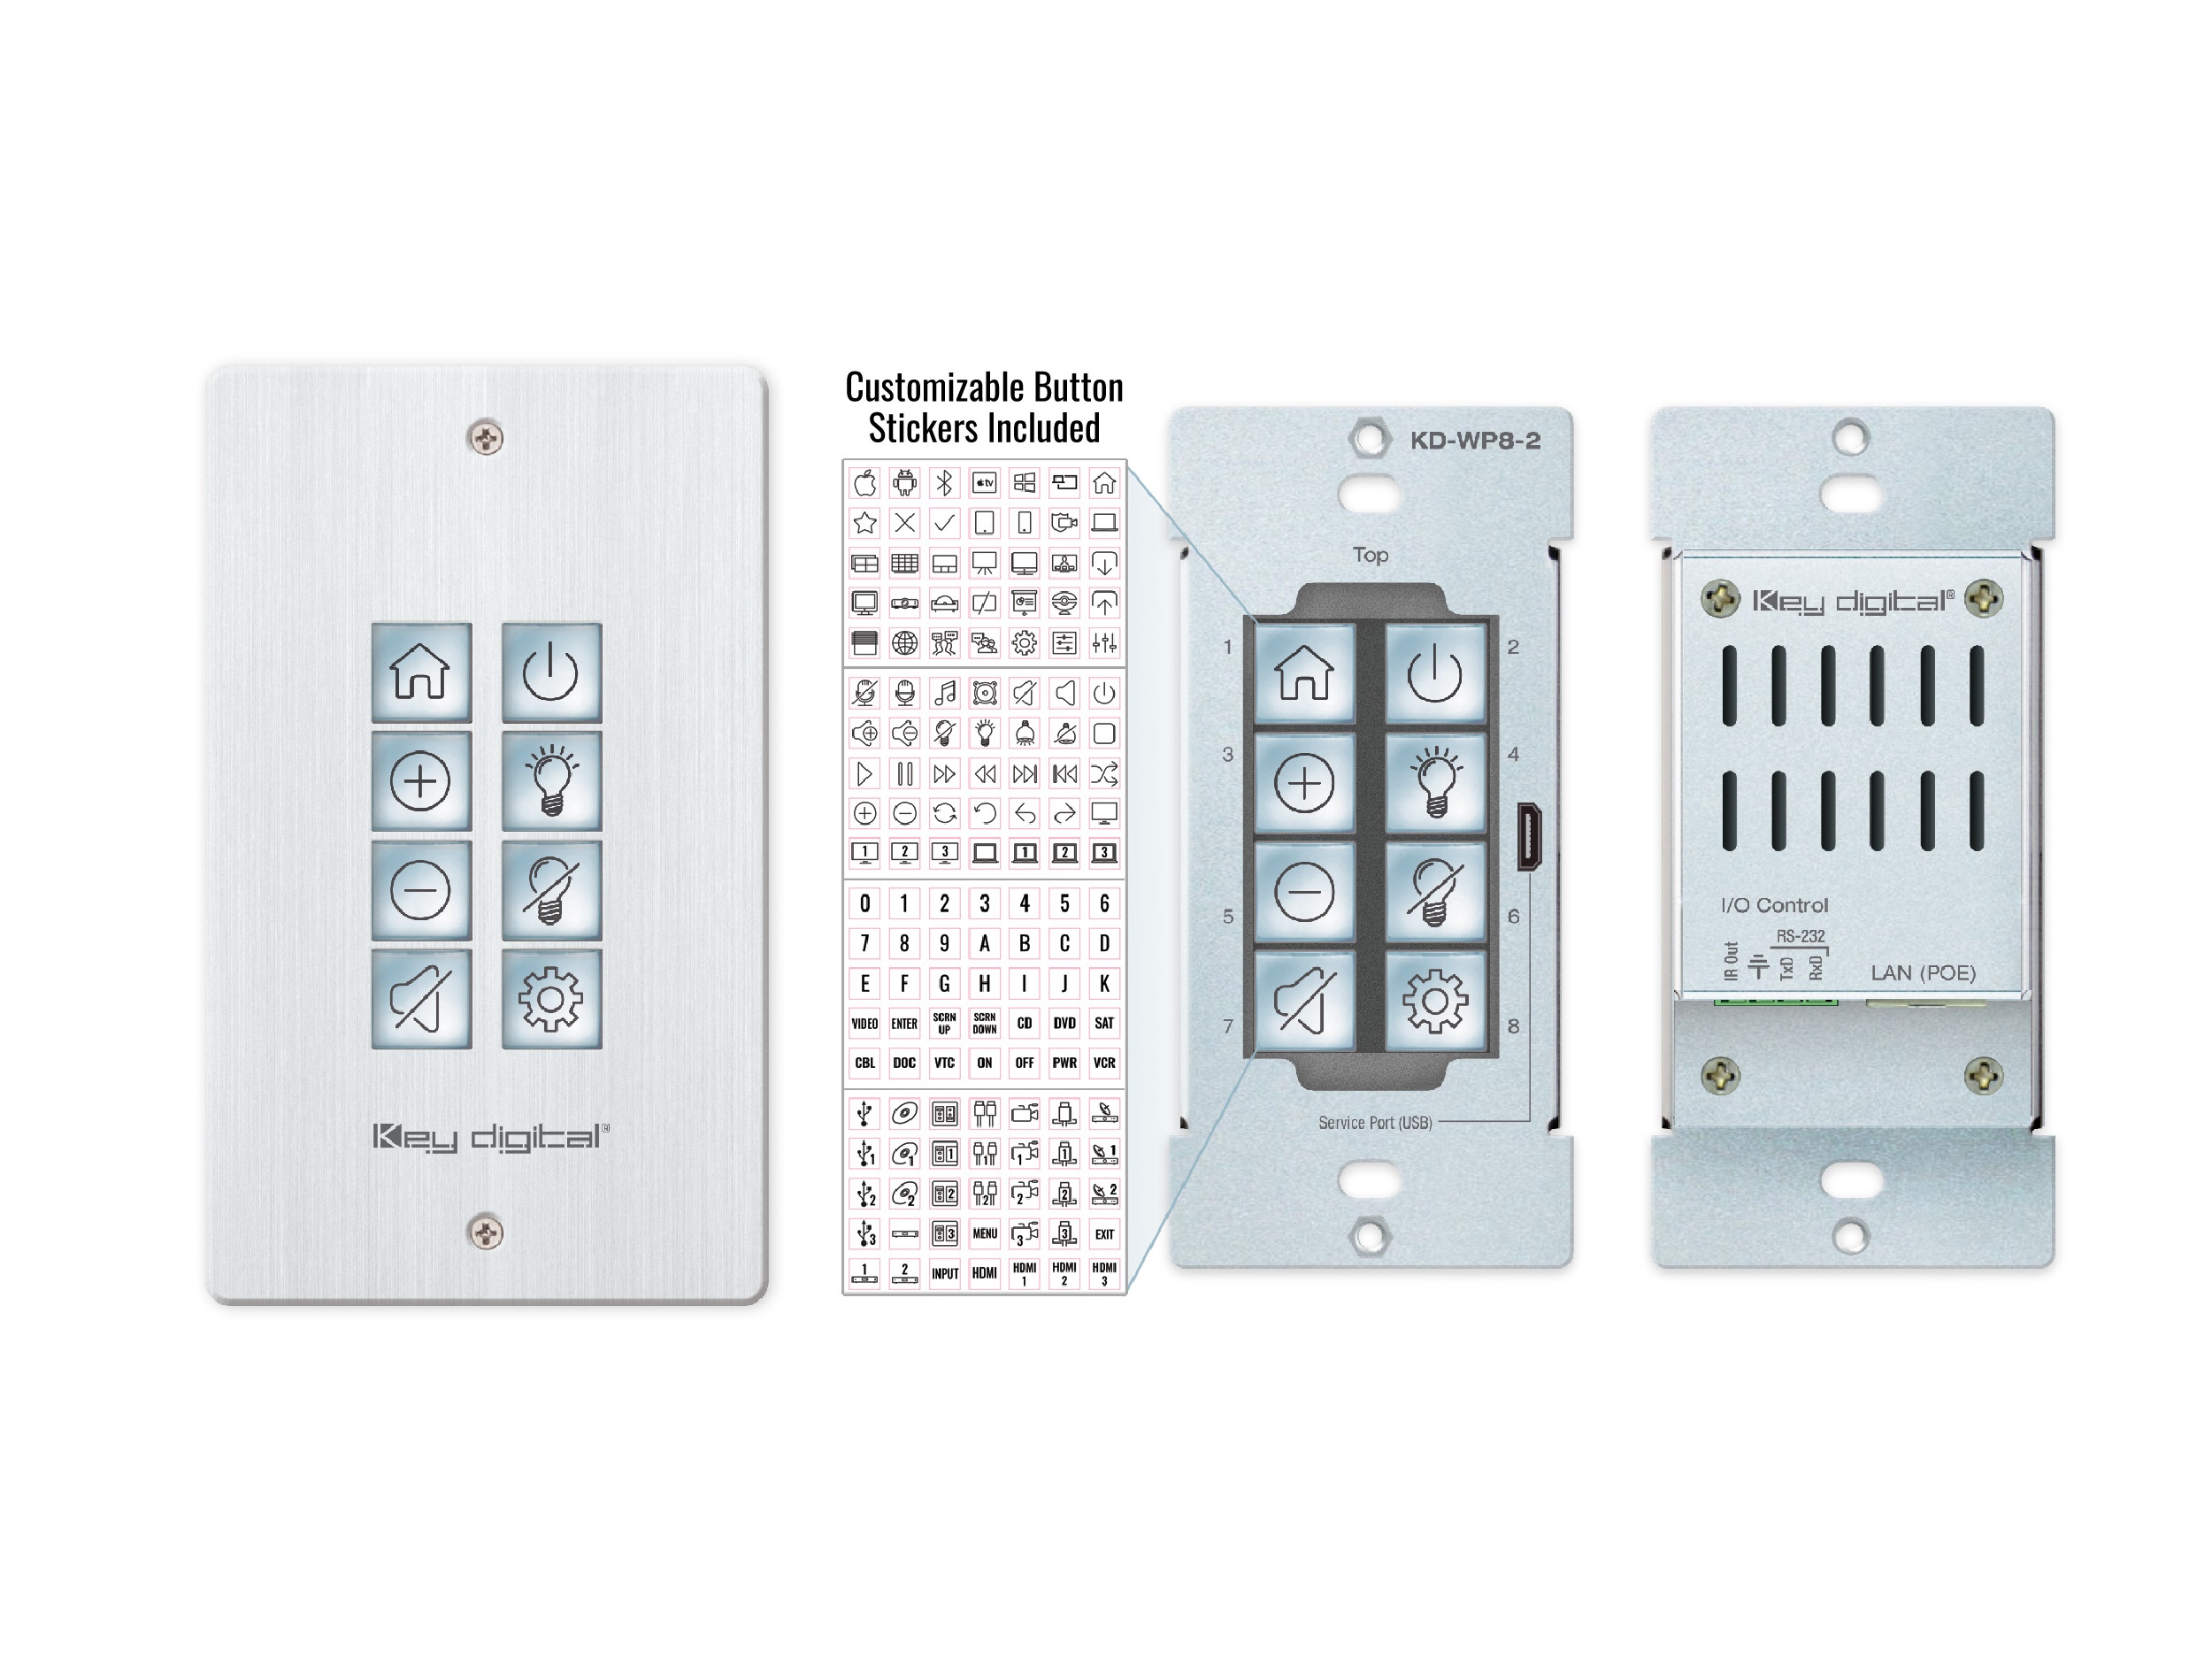 KD-WP8-2 8 Button Programmable IP/IR/RS-232 Wall Plate Control Keypad with PoE for KDPlug and Present/Compass Control Pro and Third-Party Systems via Open API by Key Digital